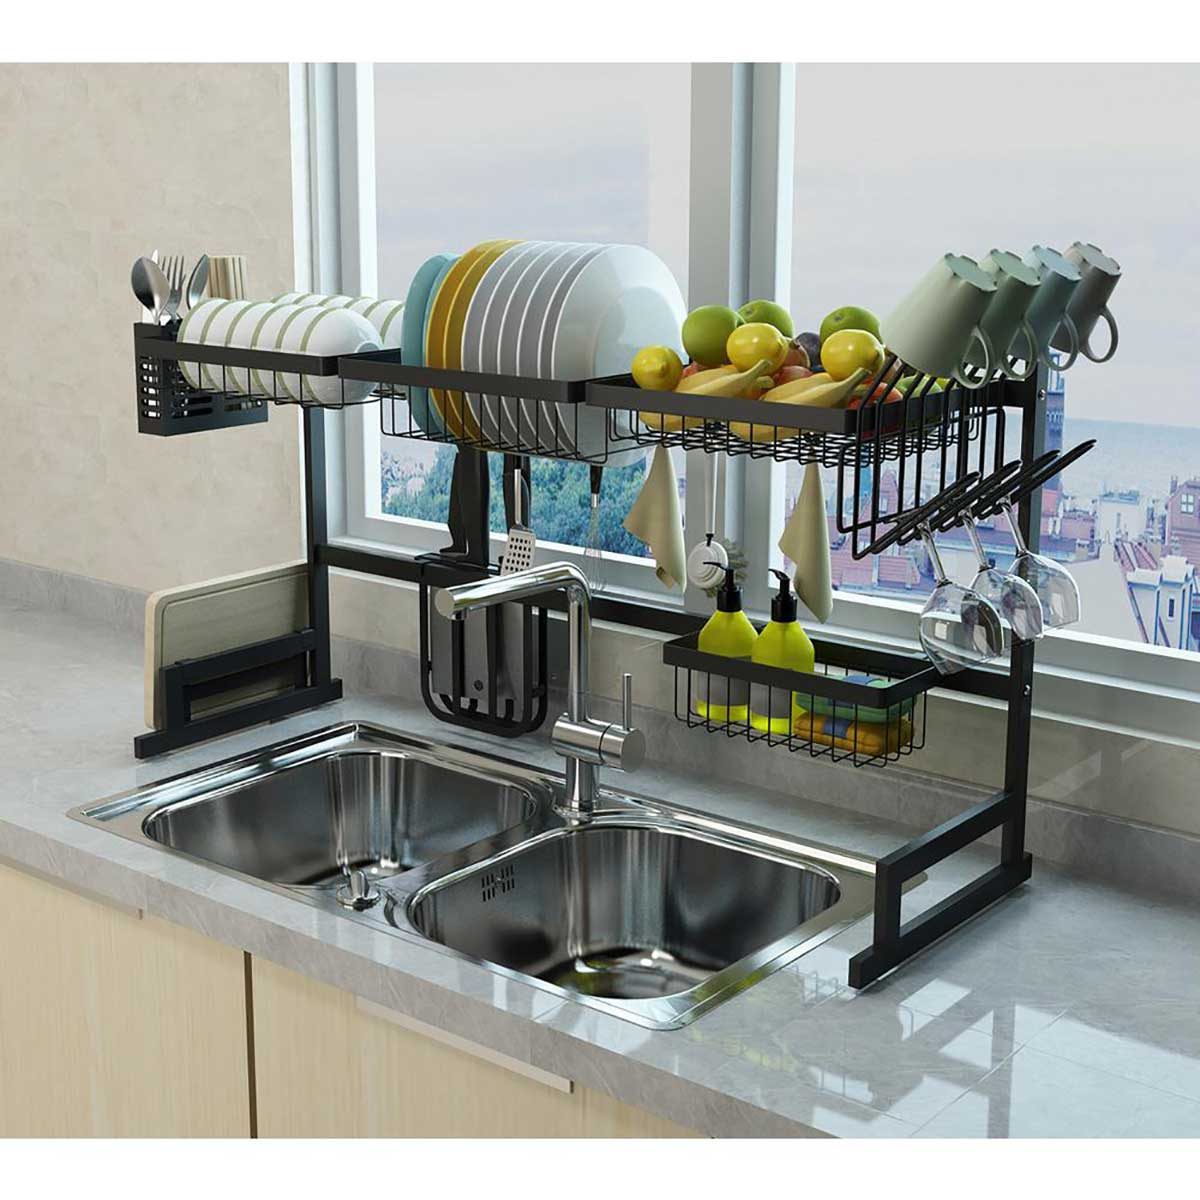 8 Best Dish Racks for Your Kitchen | The Family Handyman